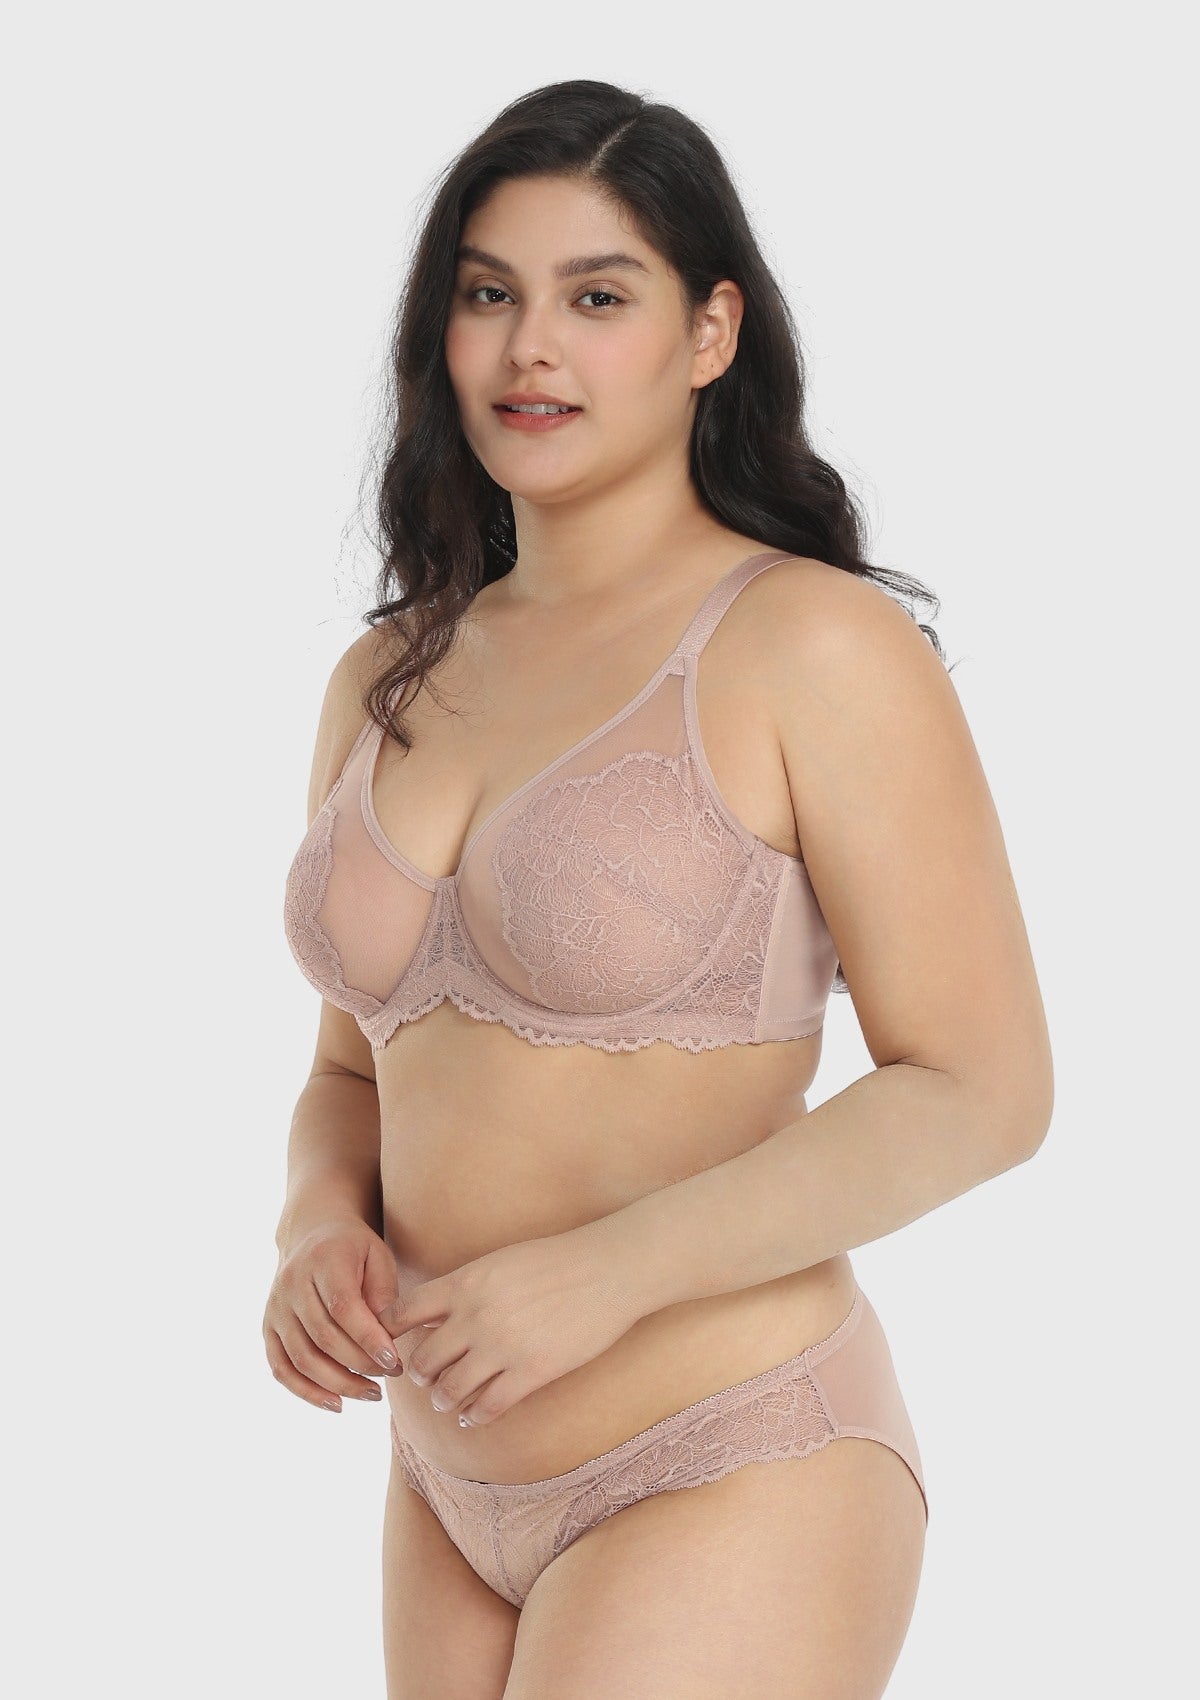 HSIA Blossom Plus Size Lace Bra - Wired, Unpadded, See-Through - Dark Pink / 46 / C